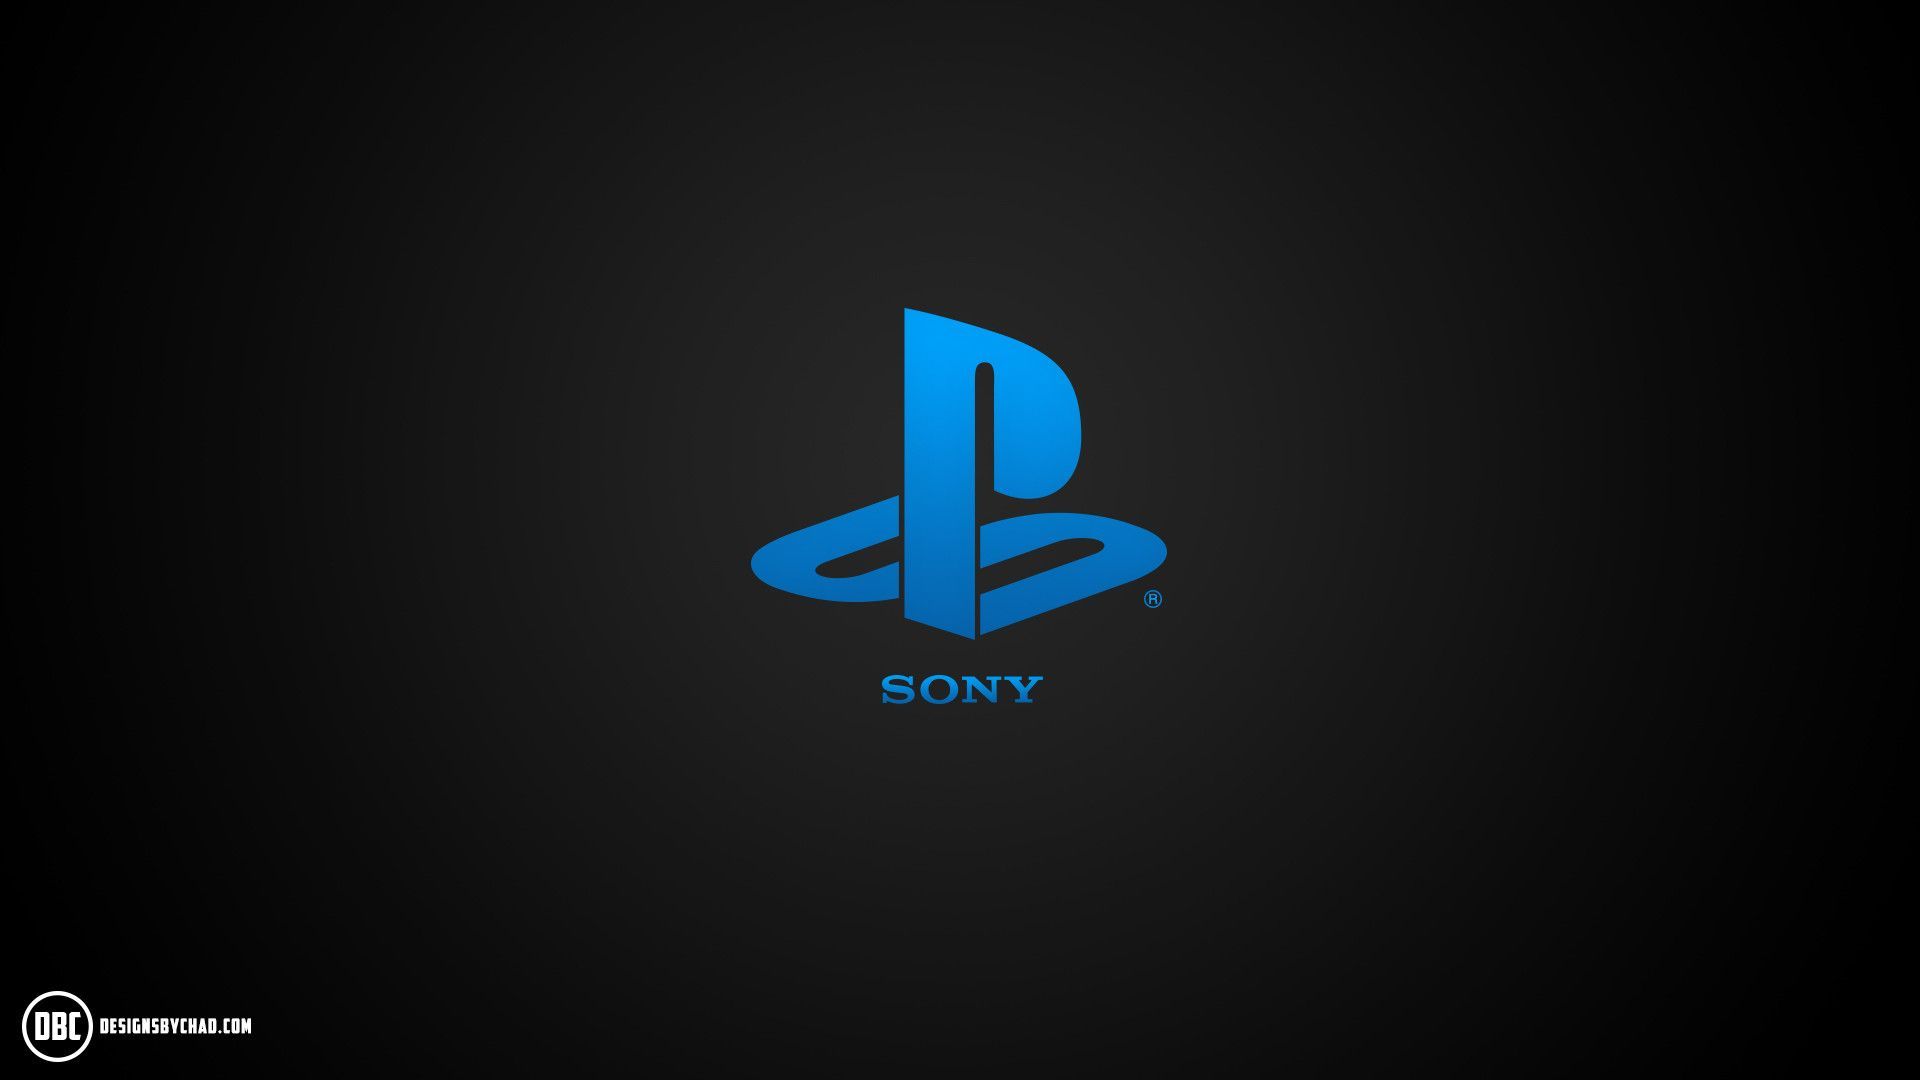 Playstation 4. Playstation Wallpaper. Playstation logo, Ps4 background, Playstation